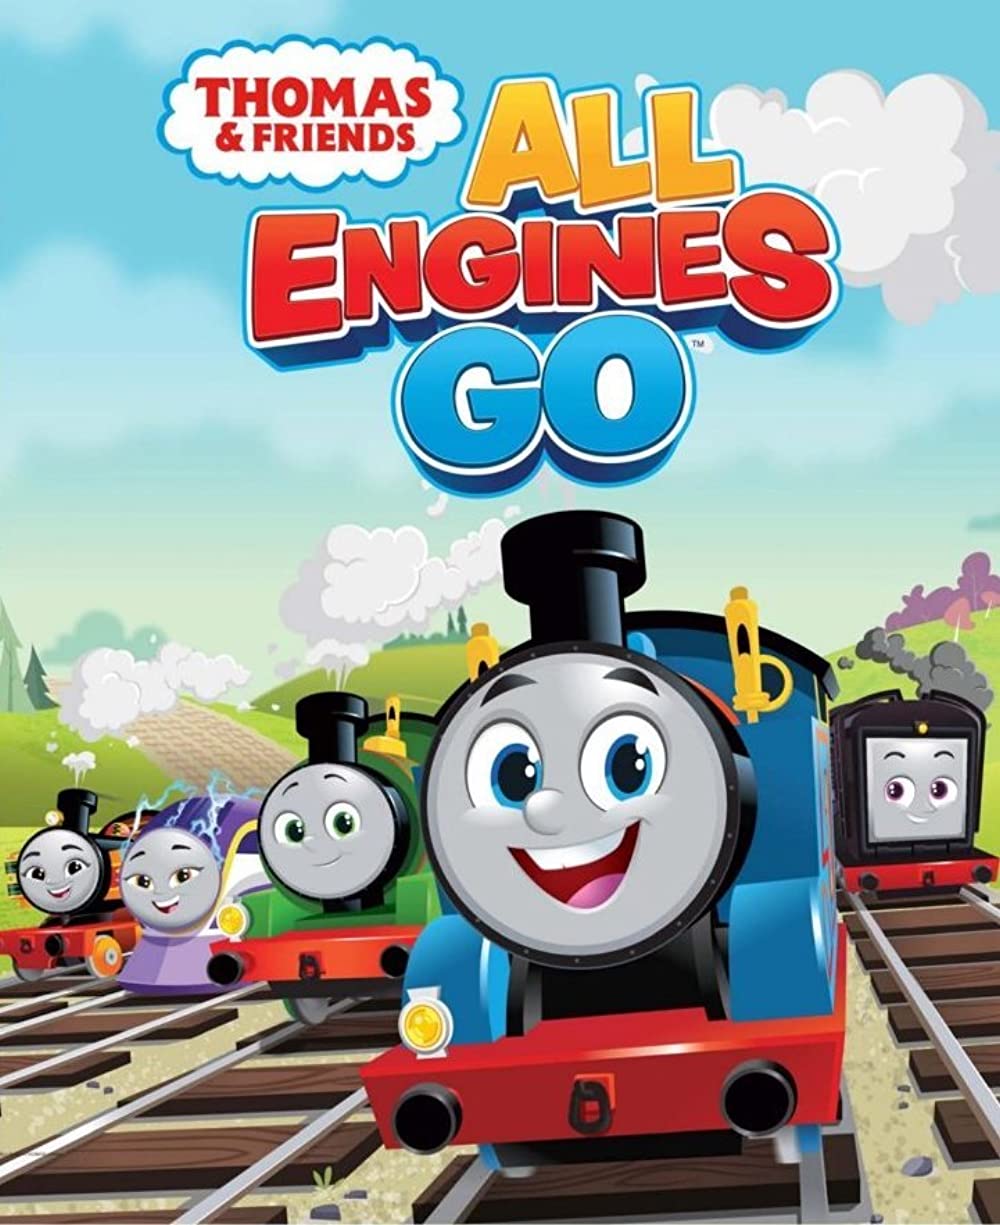 Thomas & Friends: All Engines Go. The Dubbing Database